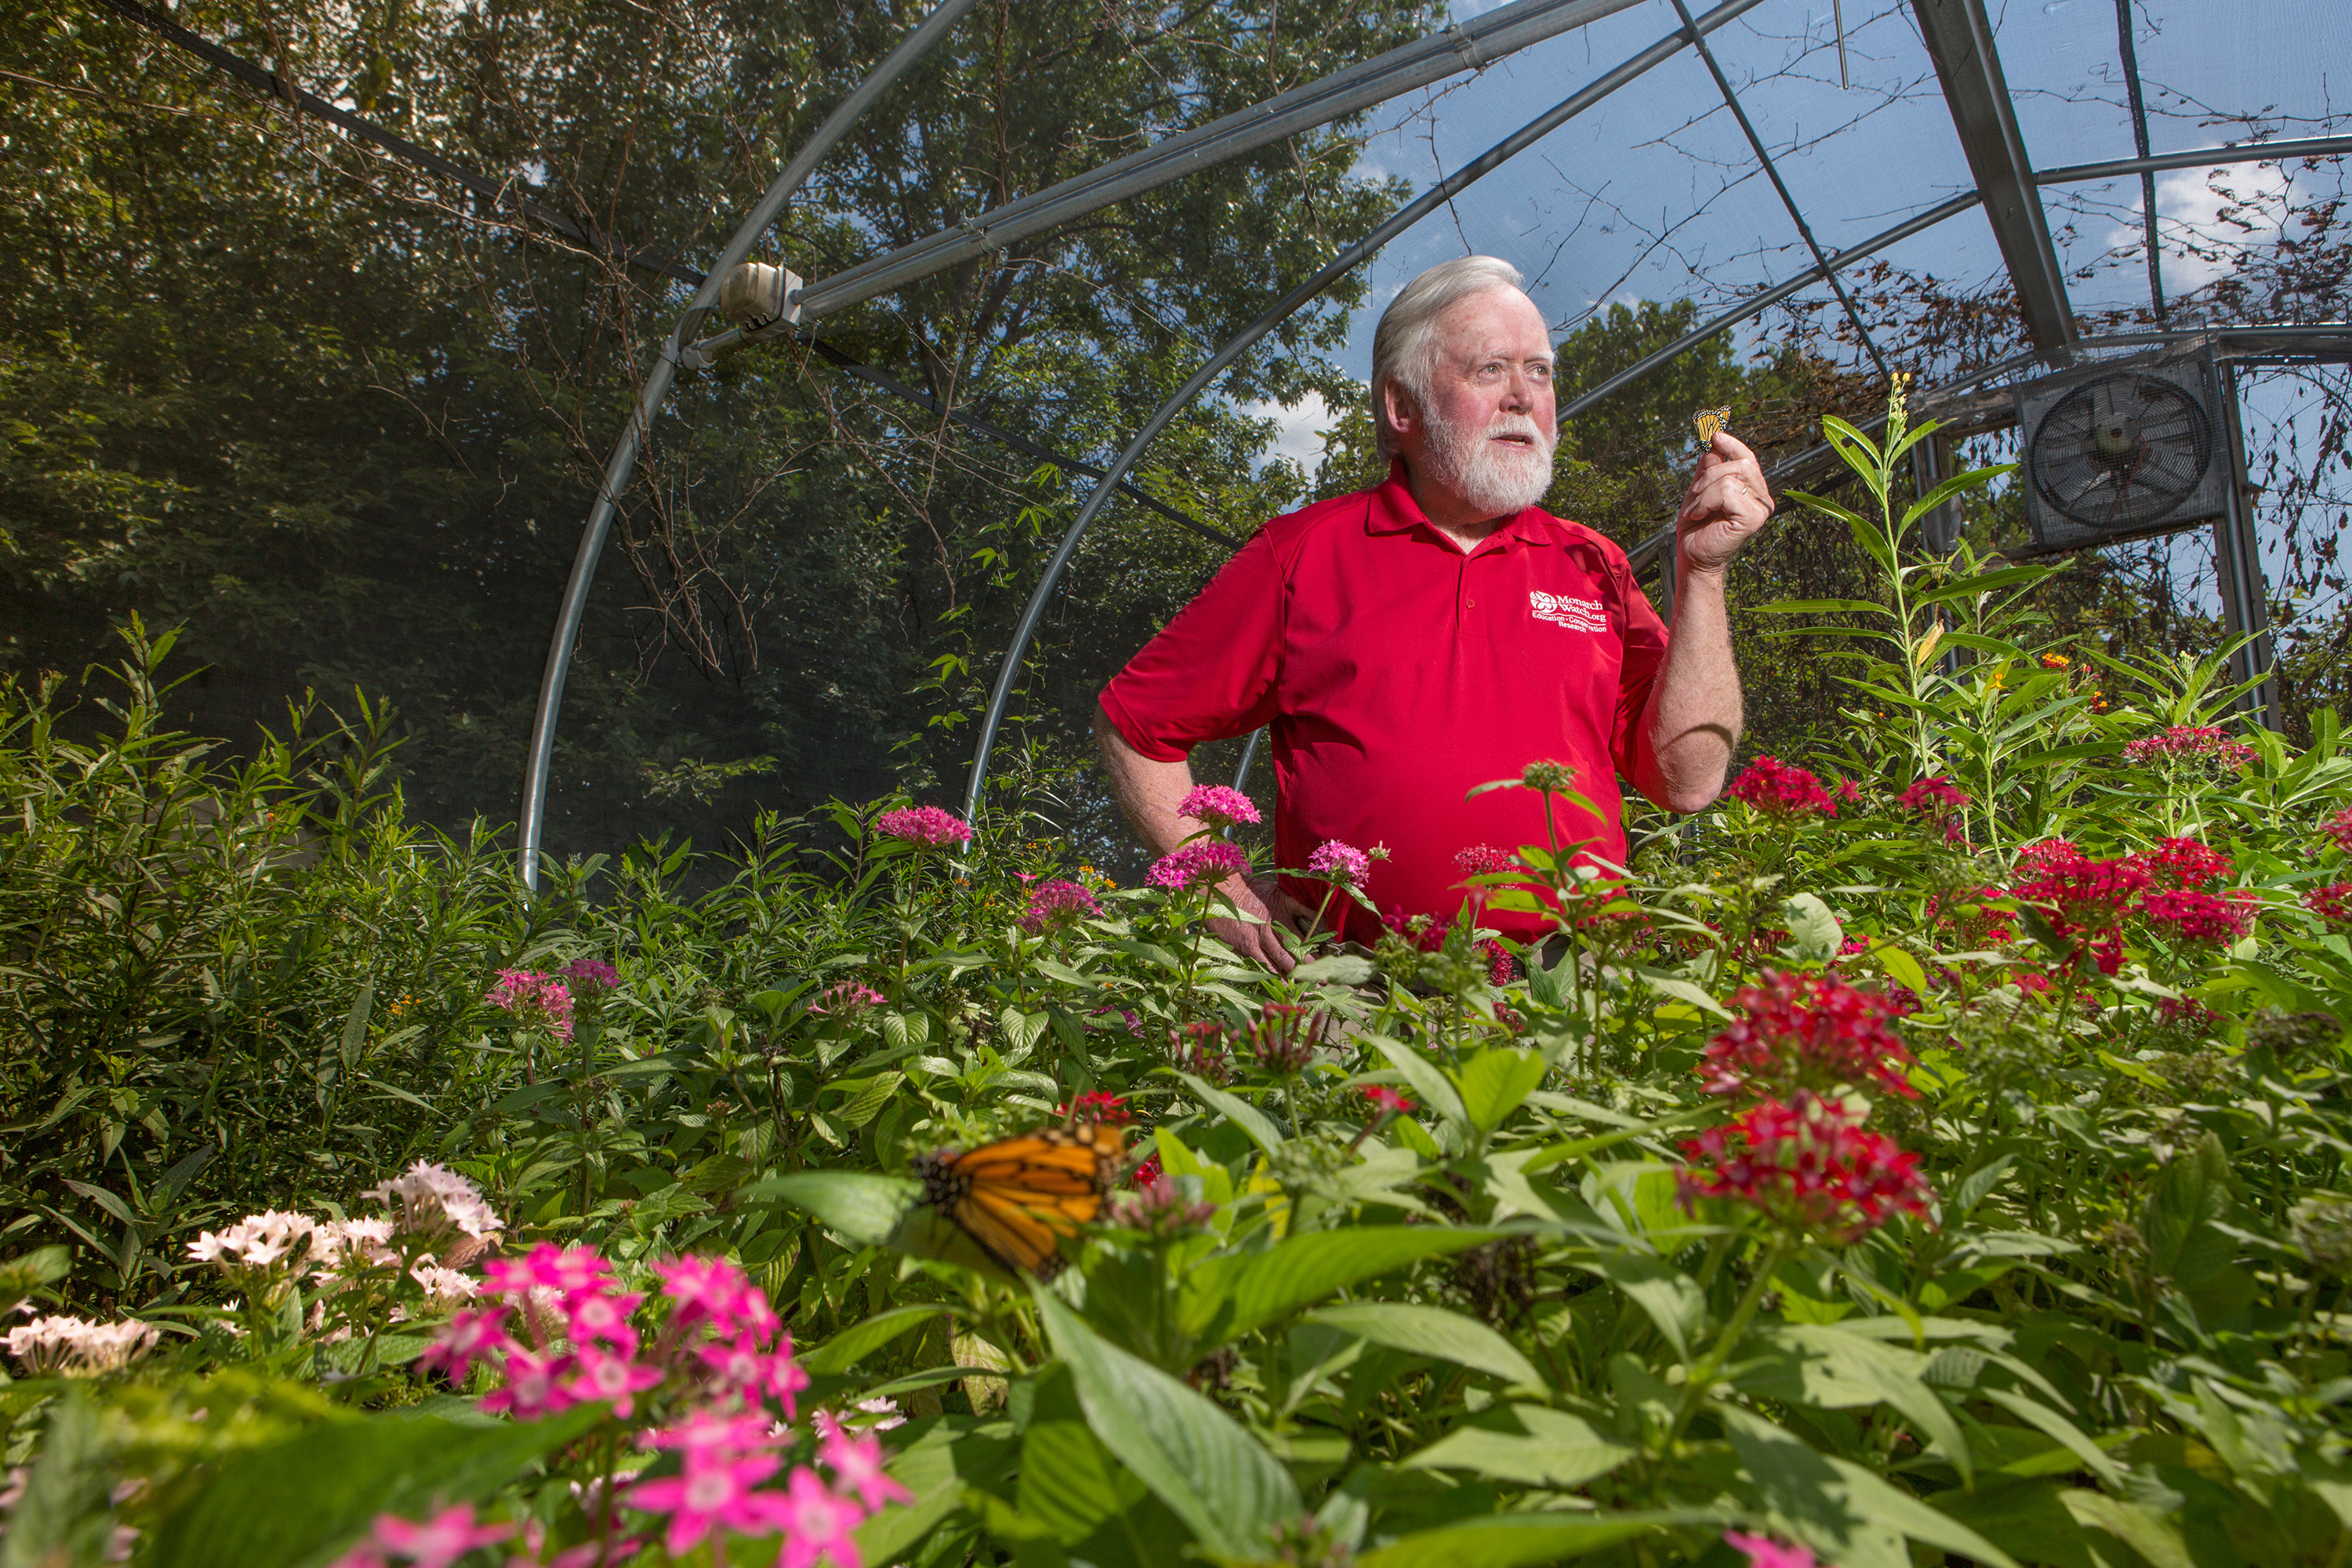 UConn alum Orley R. 'Chip' Taylor ’66 MS, ’70 Ph.D., wants everyone to plant a little milkweed and bring back the quickly disappearing monarch butterfly. (Photo courtesy of the University of Kansas/Marketing Communications)